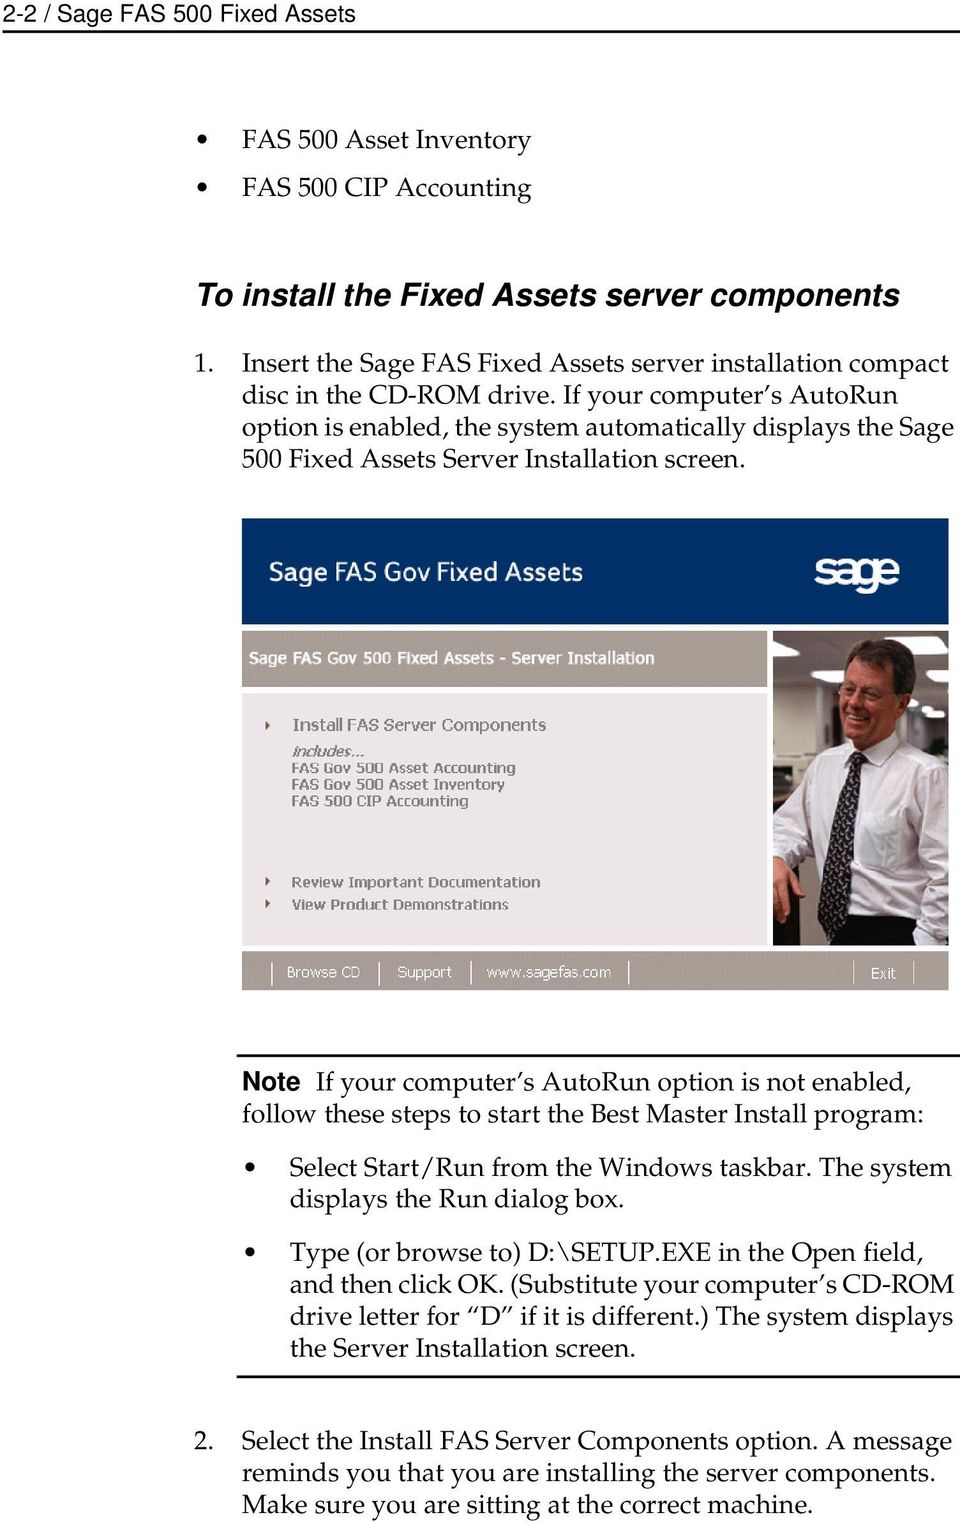 If your computer s AutoRun option is enabled, the system automatically displays the Sage 500 Fixed Assets Server Installation screen.